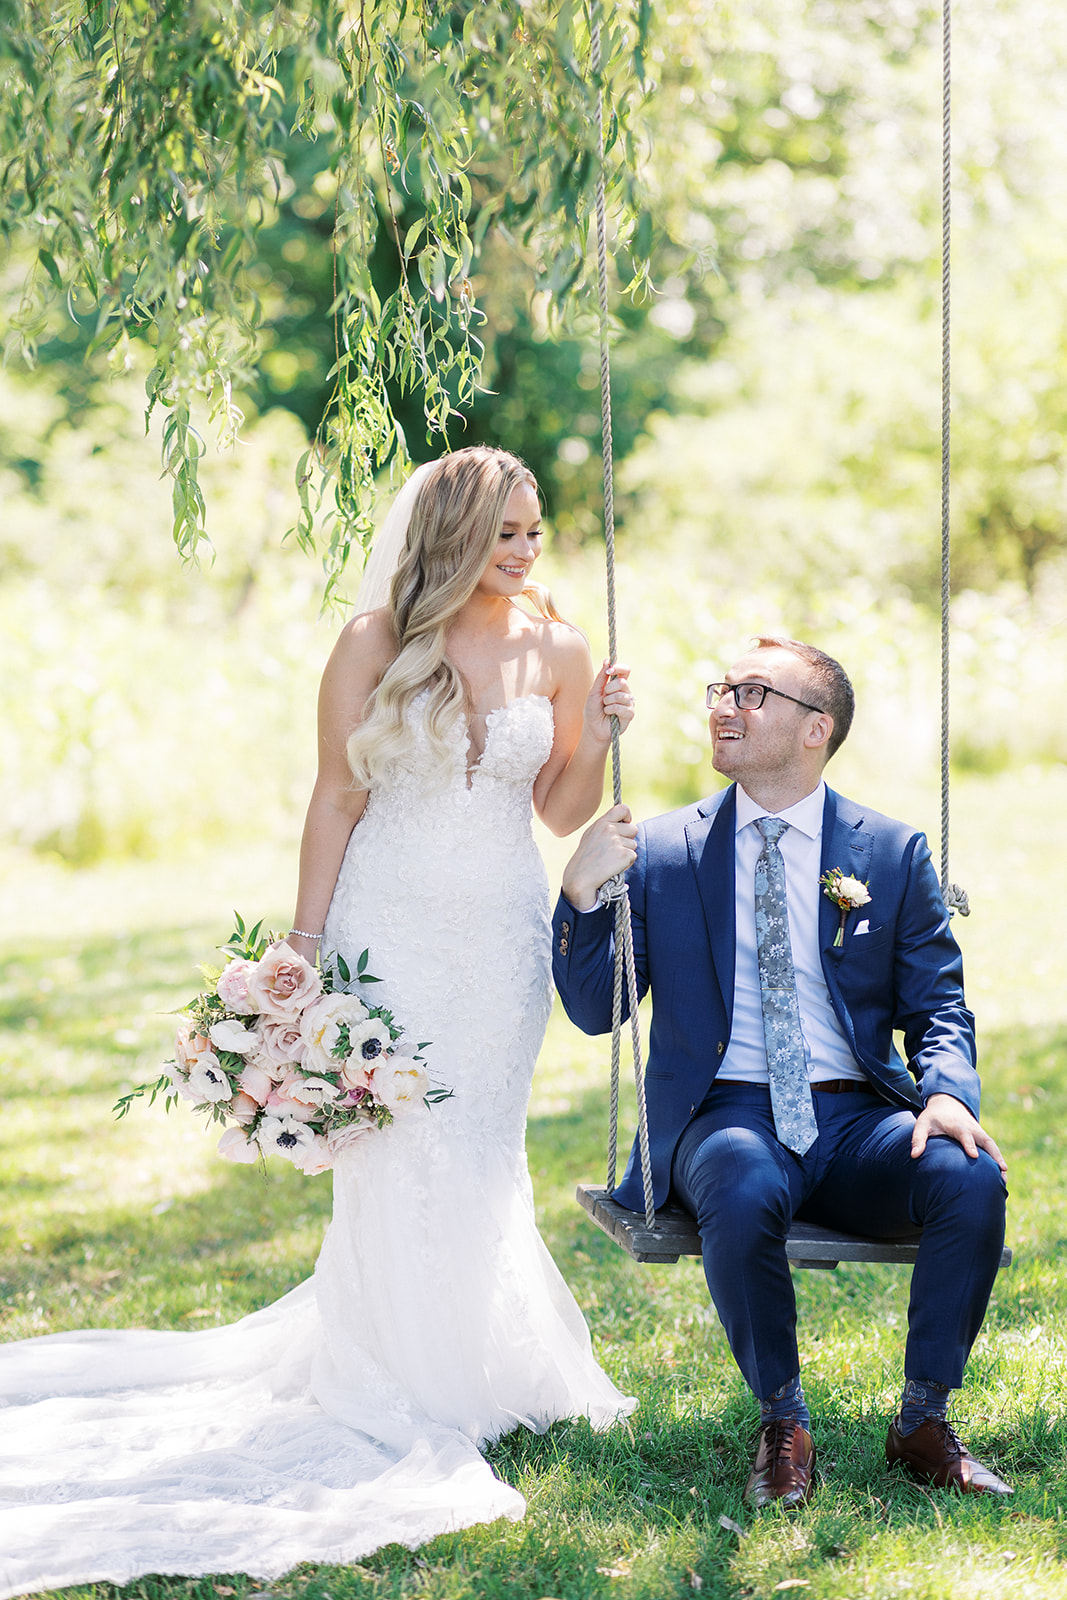 A groom in a blue suit sits on a tree swing as his bride leans on the rope smiling down at him